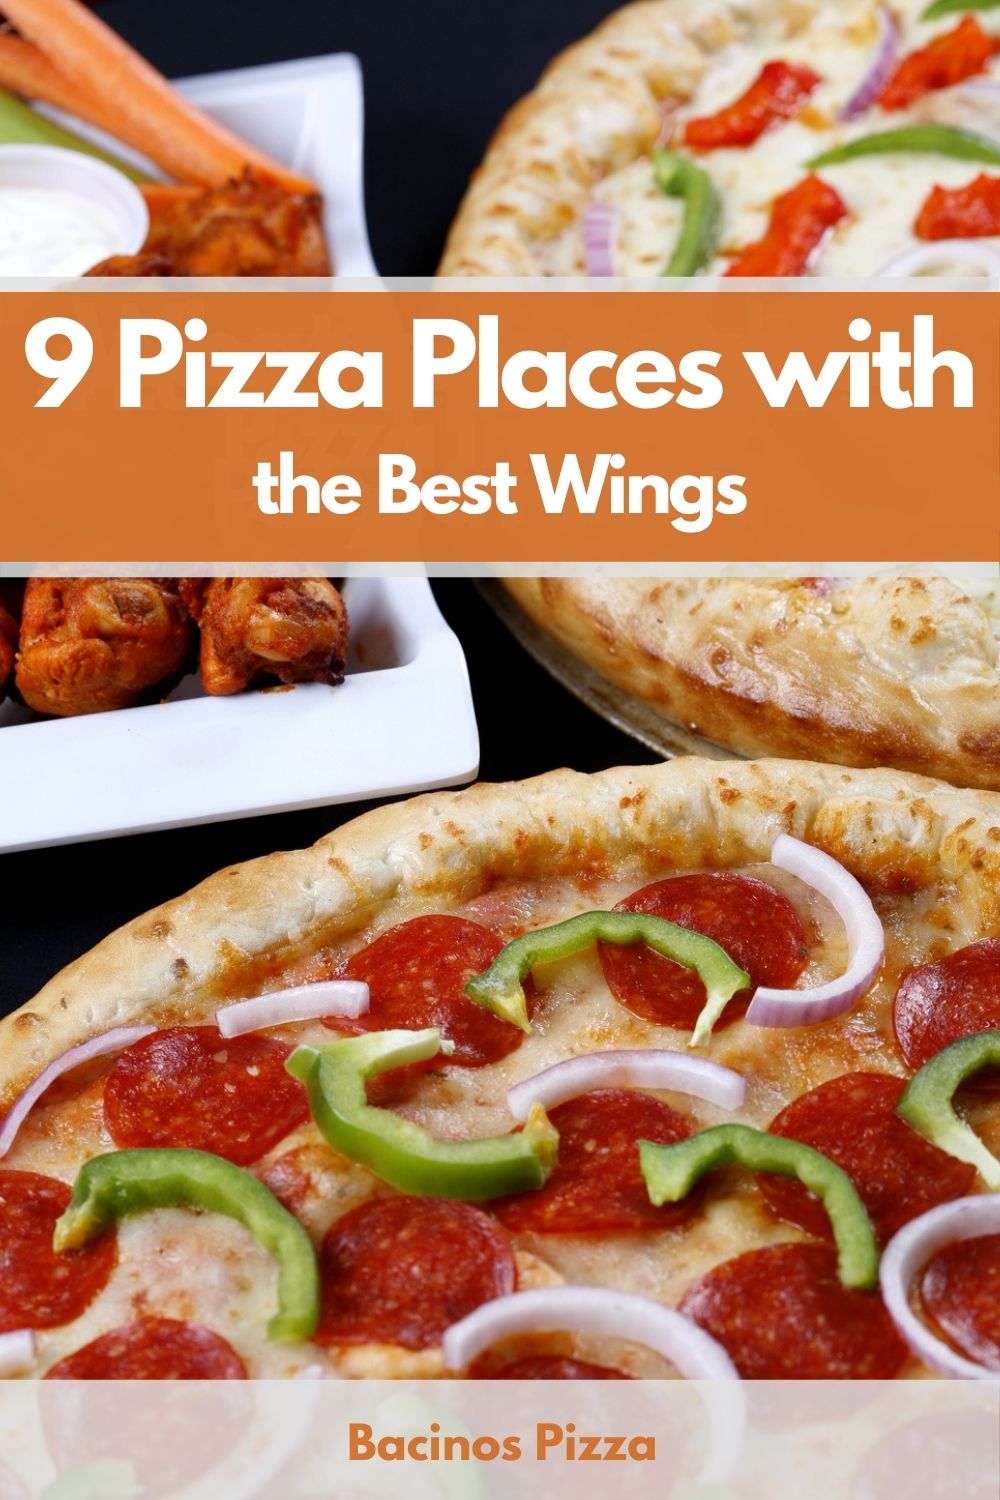 9 Pizza Places with the Best Wings pin 2